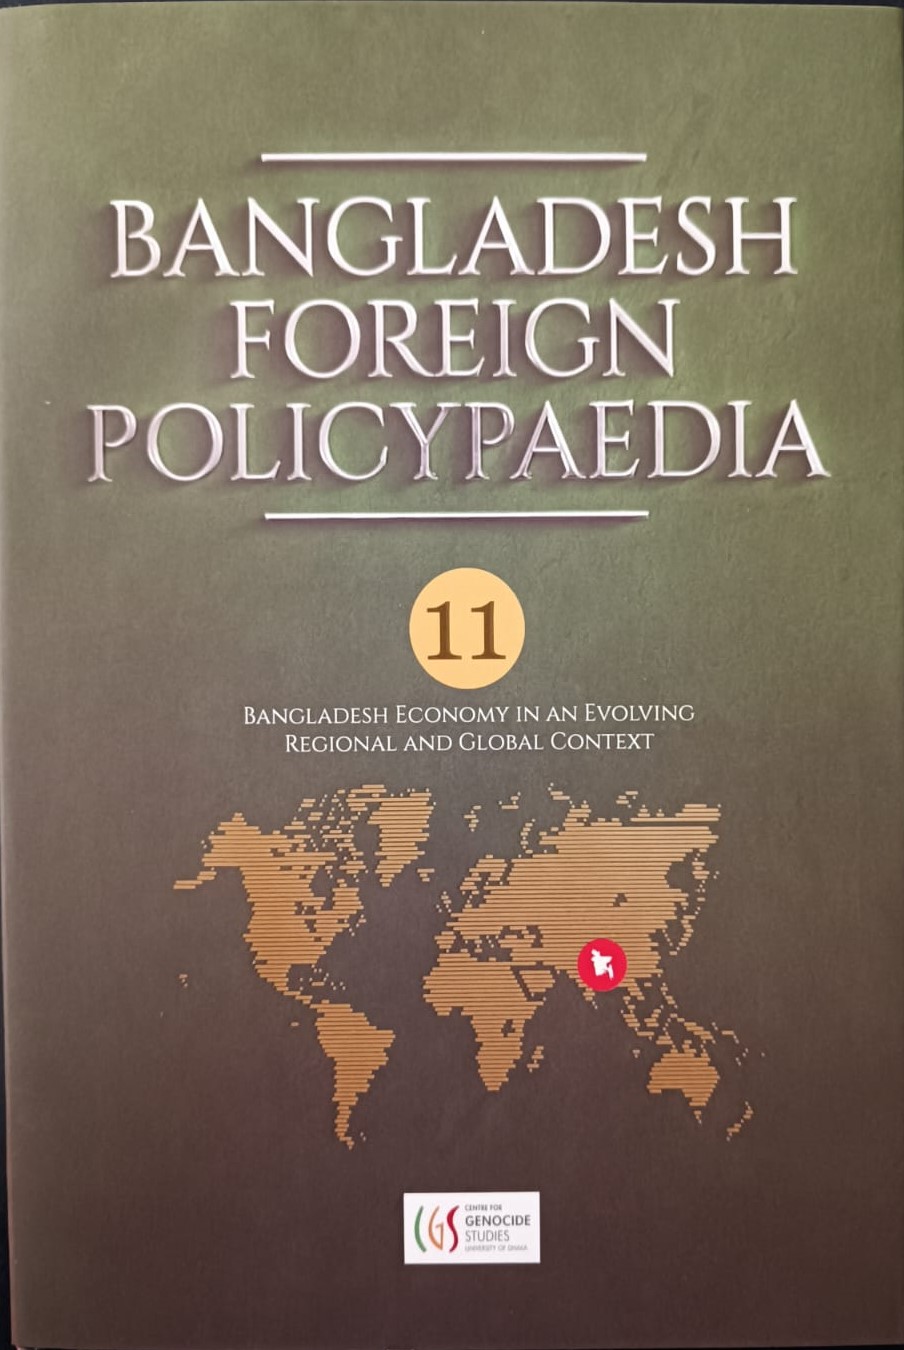 Bangladesh Foreign Policy Paedia: Bangladesh Economy in an Evolving Regional and Global Context